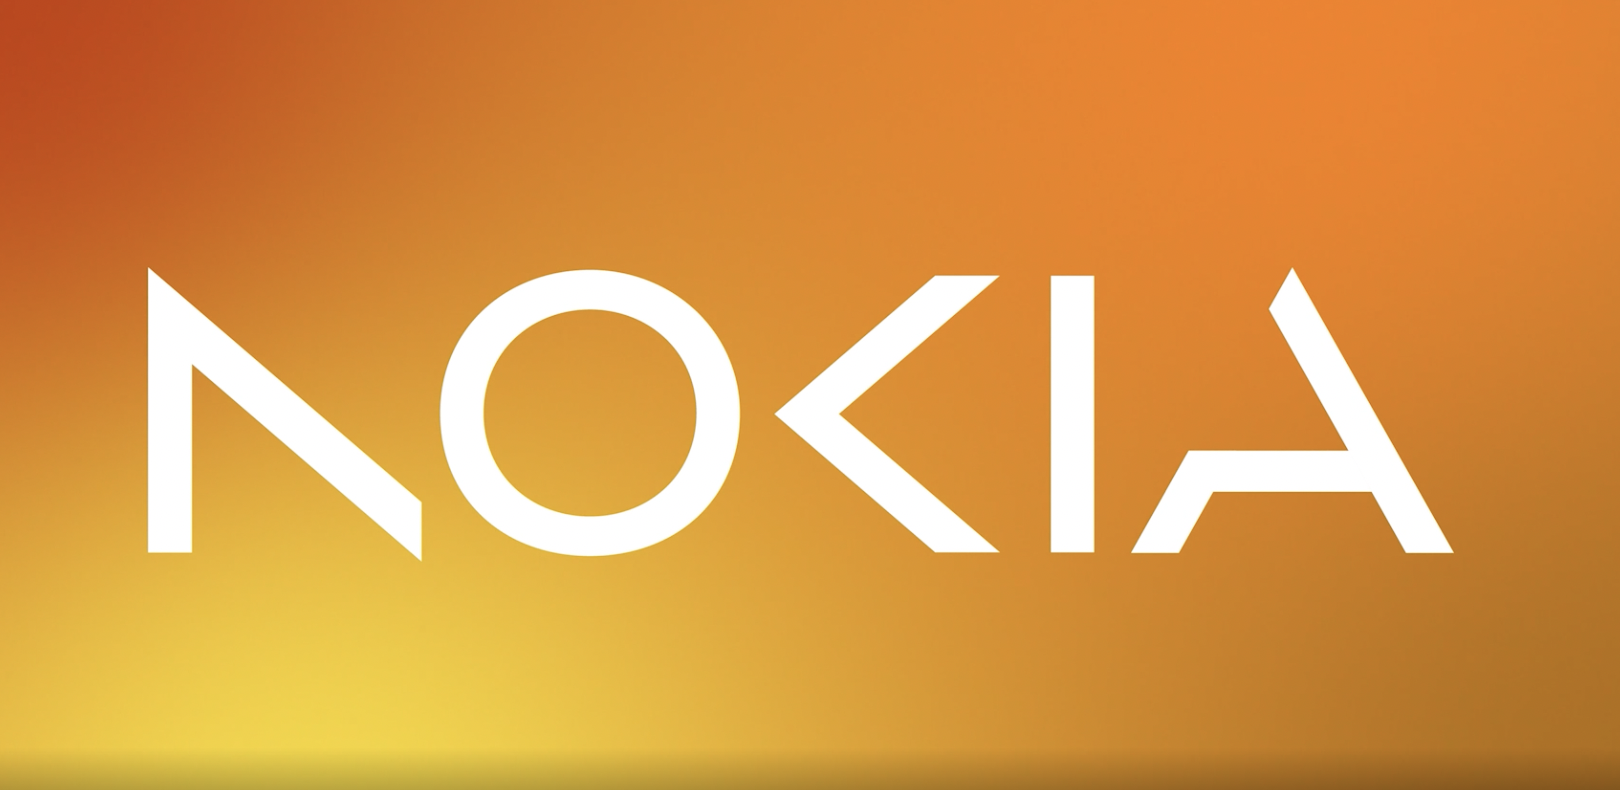 Nokia launches Network as Code platform, with Dish as early partner